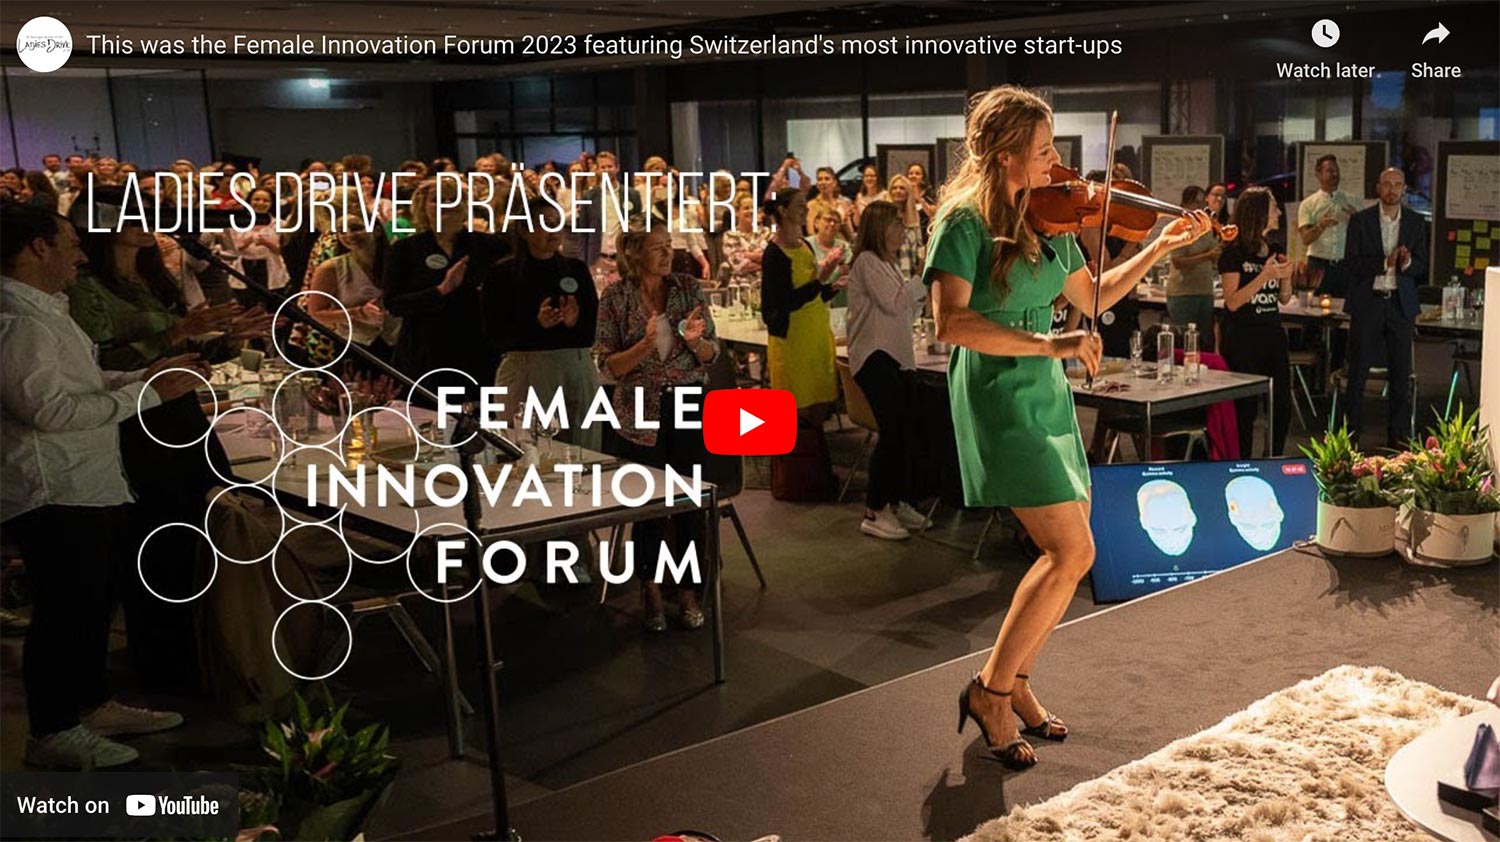 VIDEO – This was the Female Innovation Forum 2023 featuring Switzerland’s most innovative start-ups